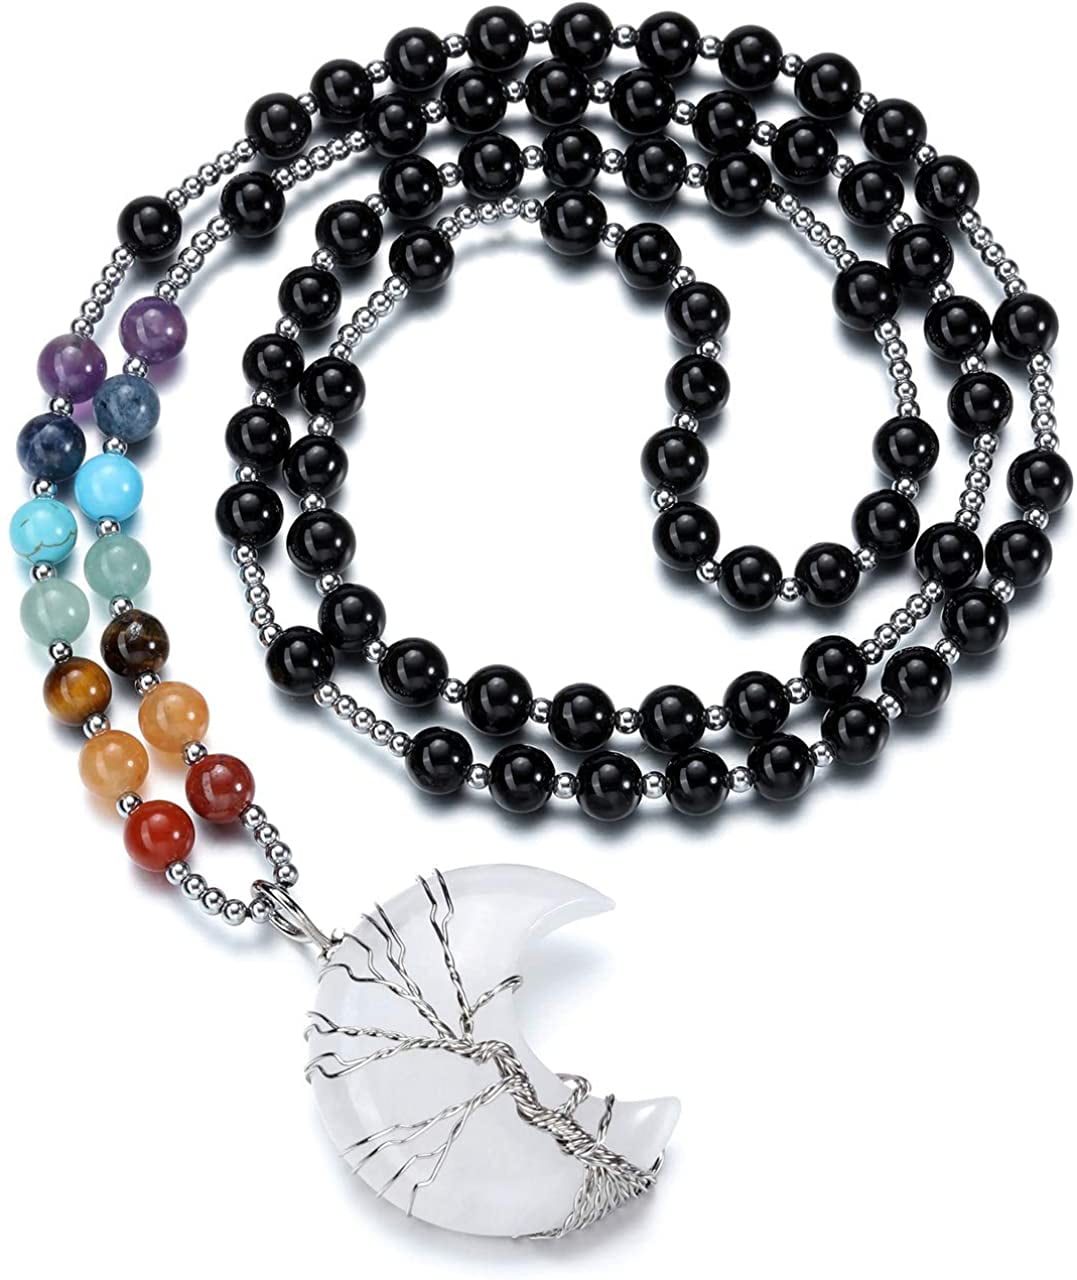 Natural Gemstones Moon and Stars Reiki Chakra Healing Beads Pendant Necklaces 